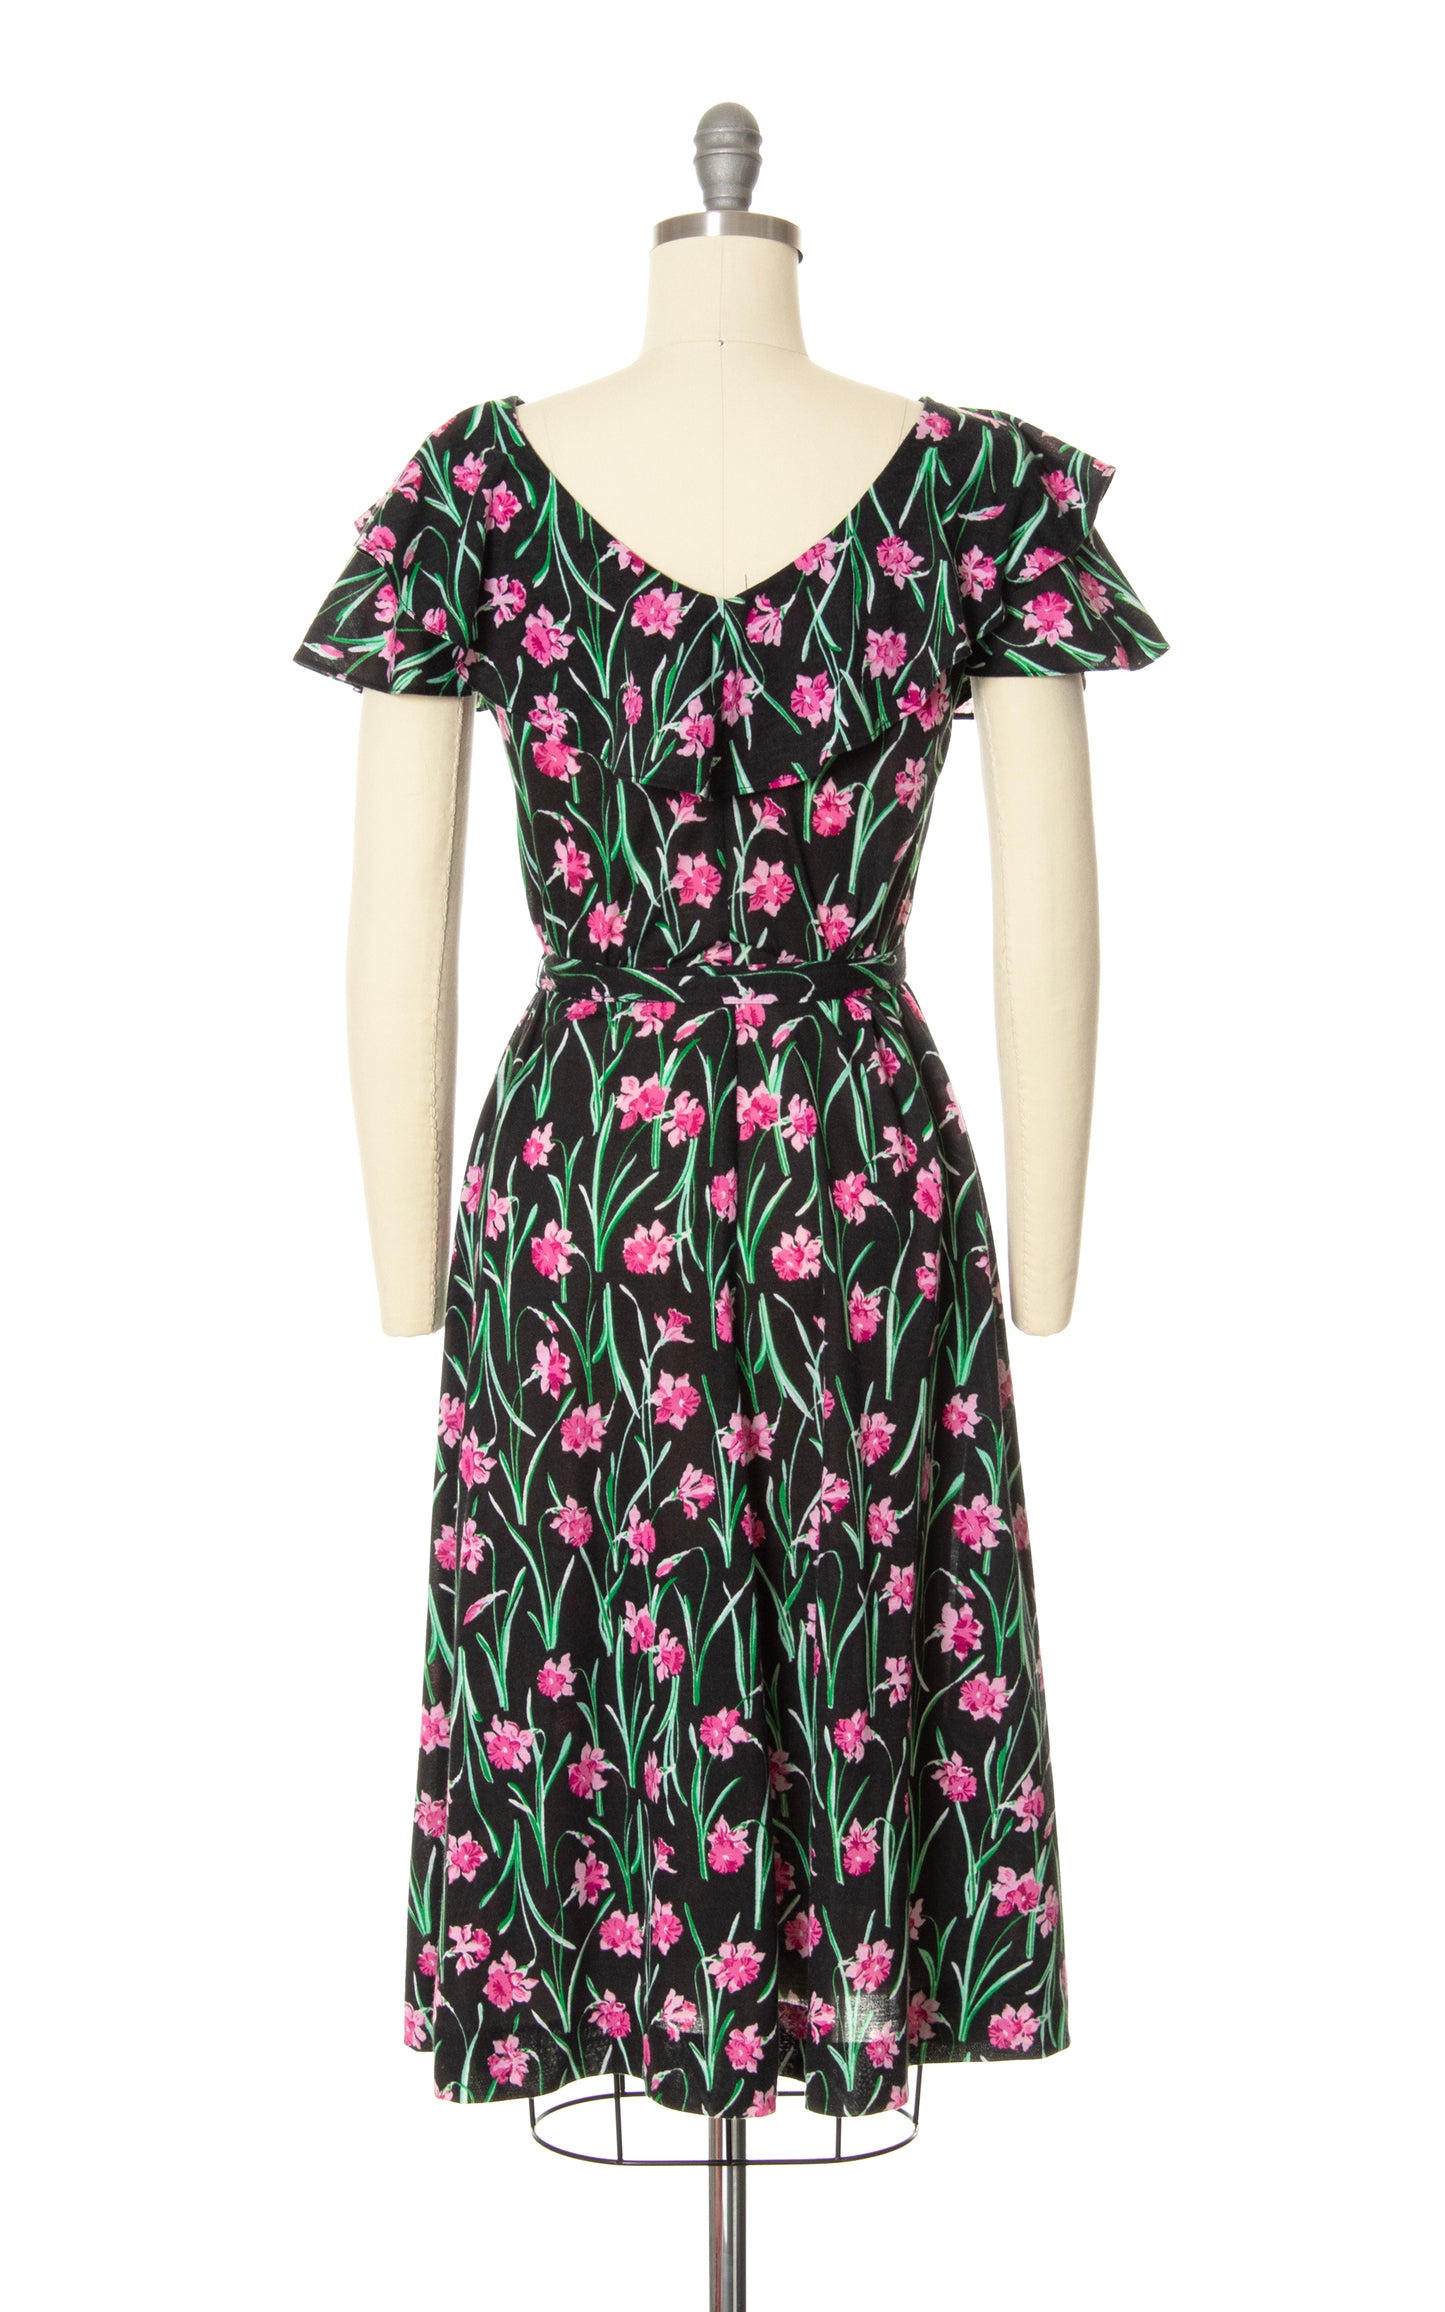 1970s Floral Cotton Jersey Wrap Dress | x-small/small